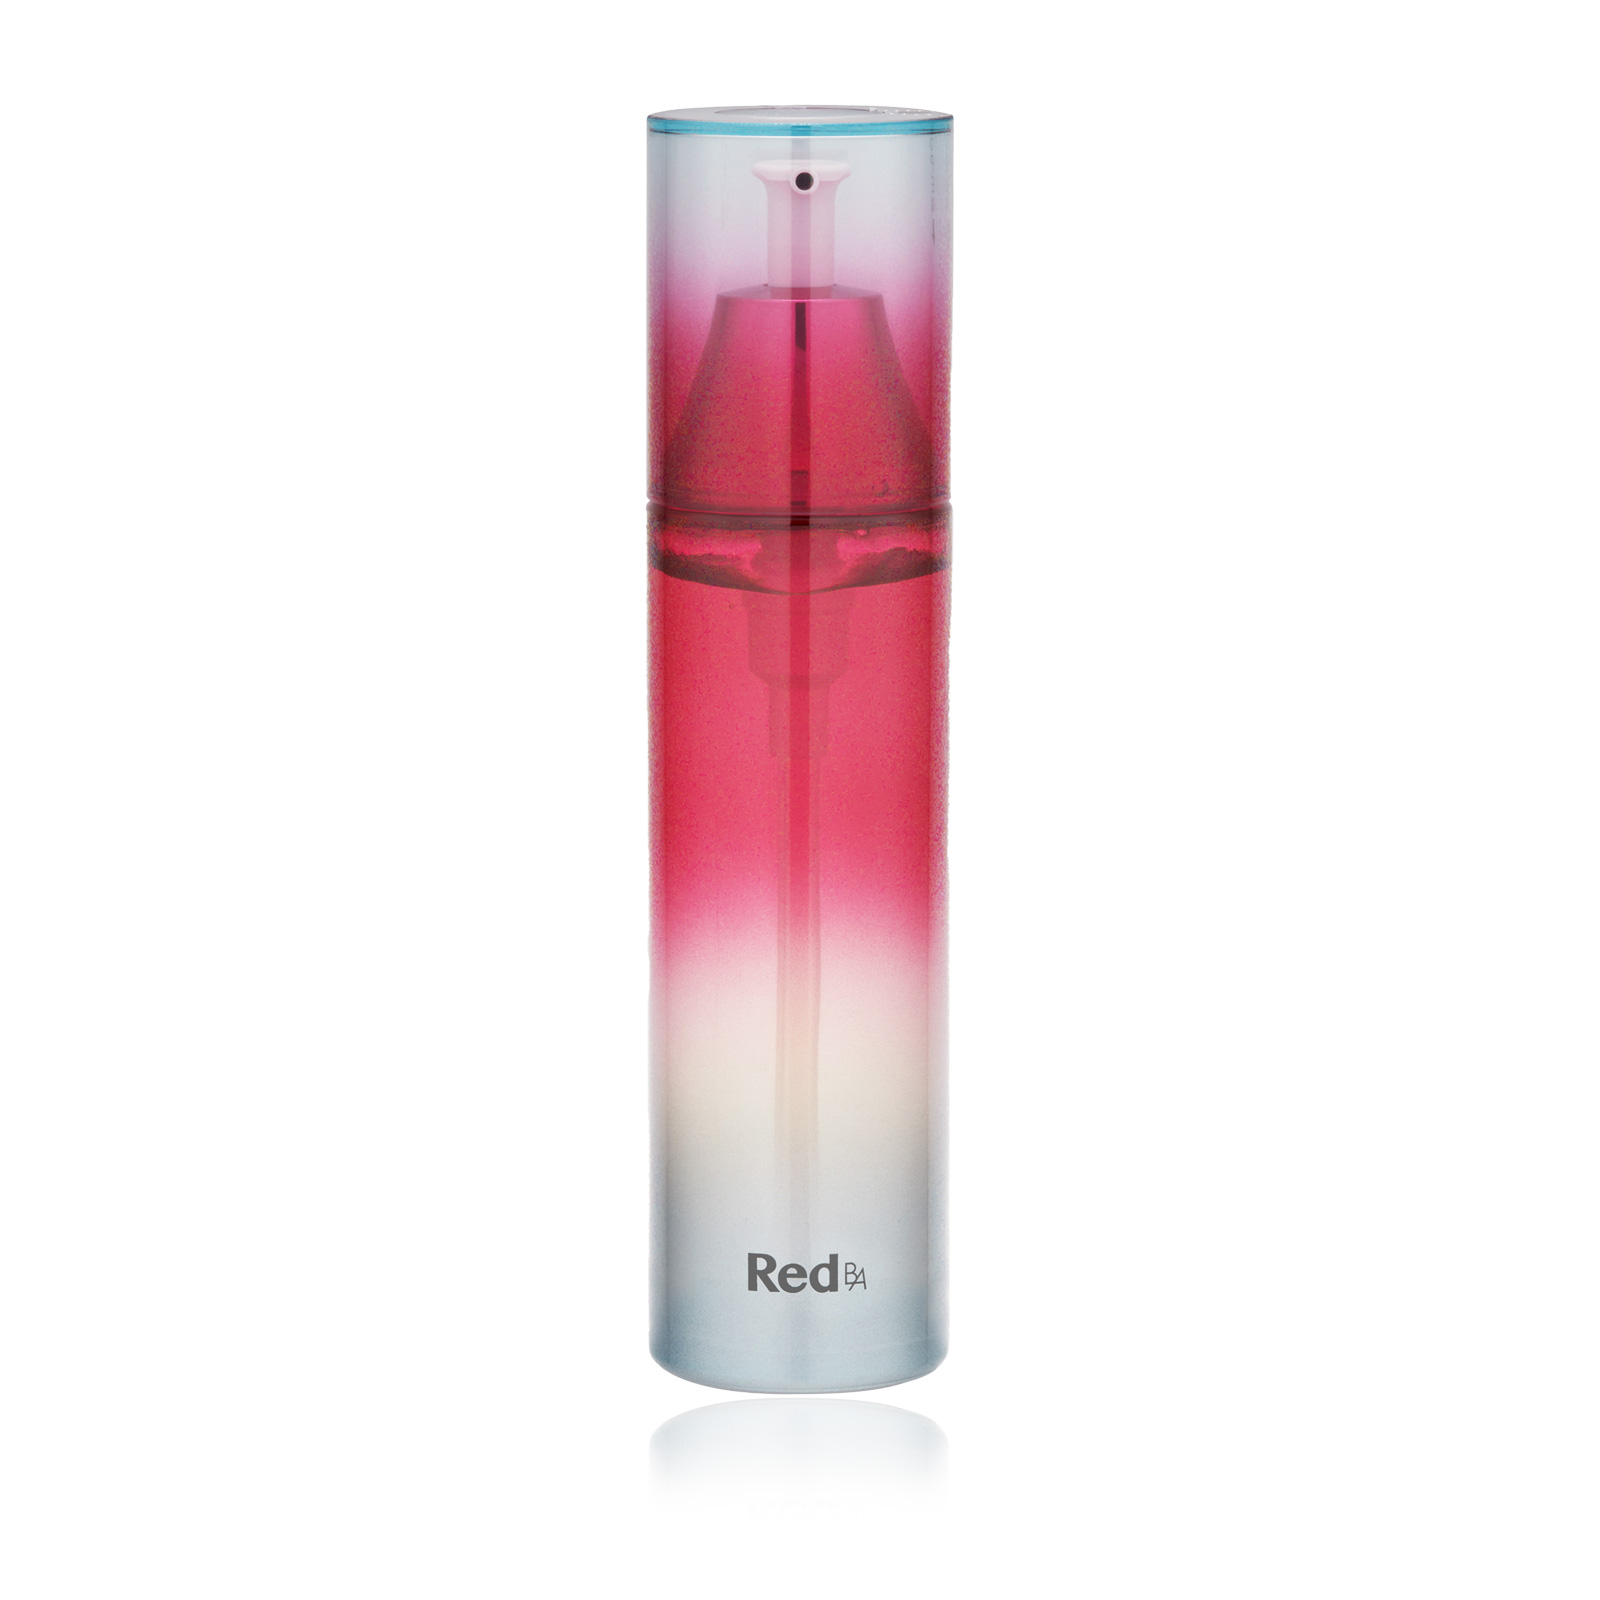 Red B.A Volume Moisture Lotion